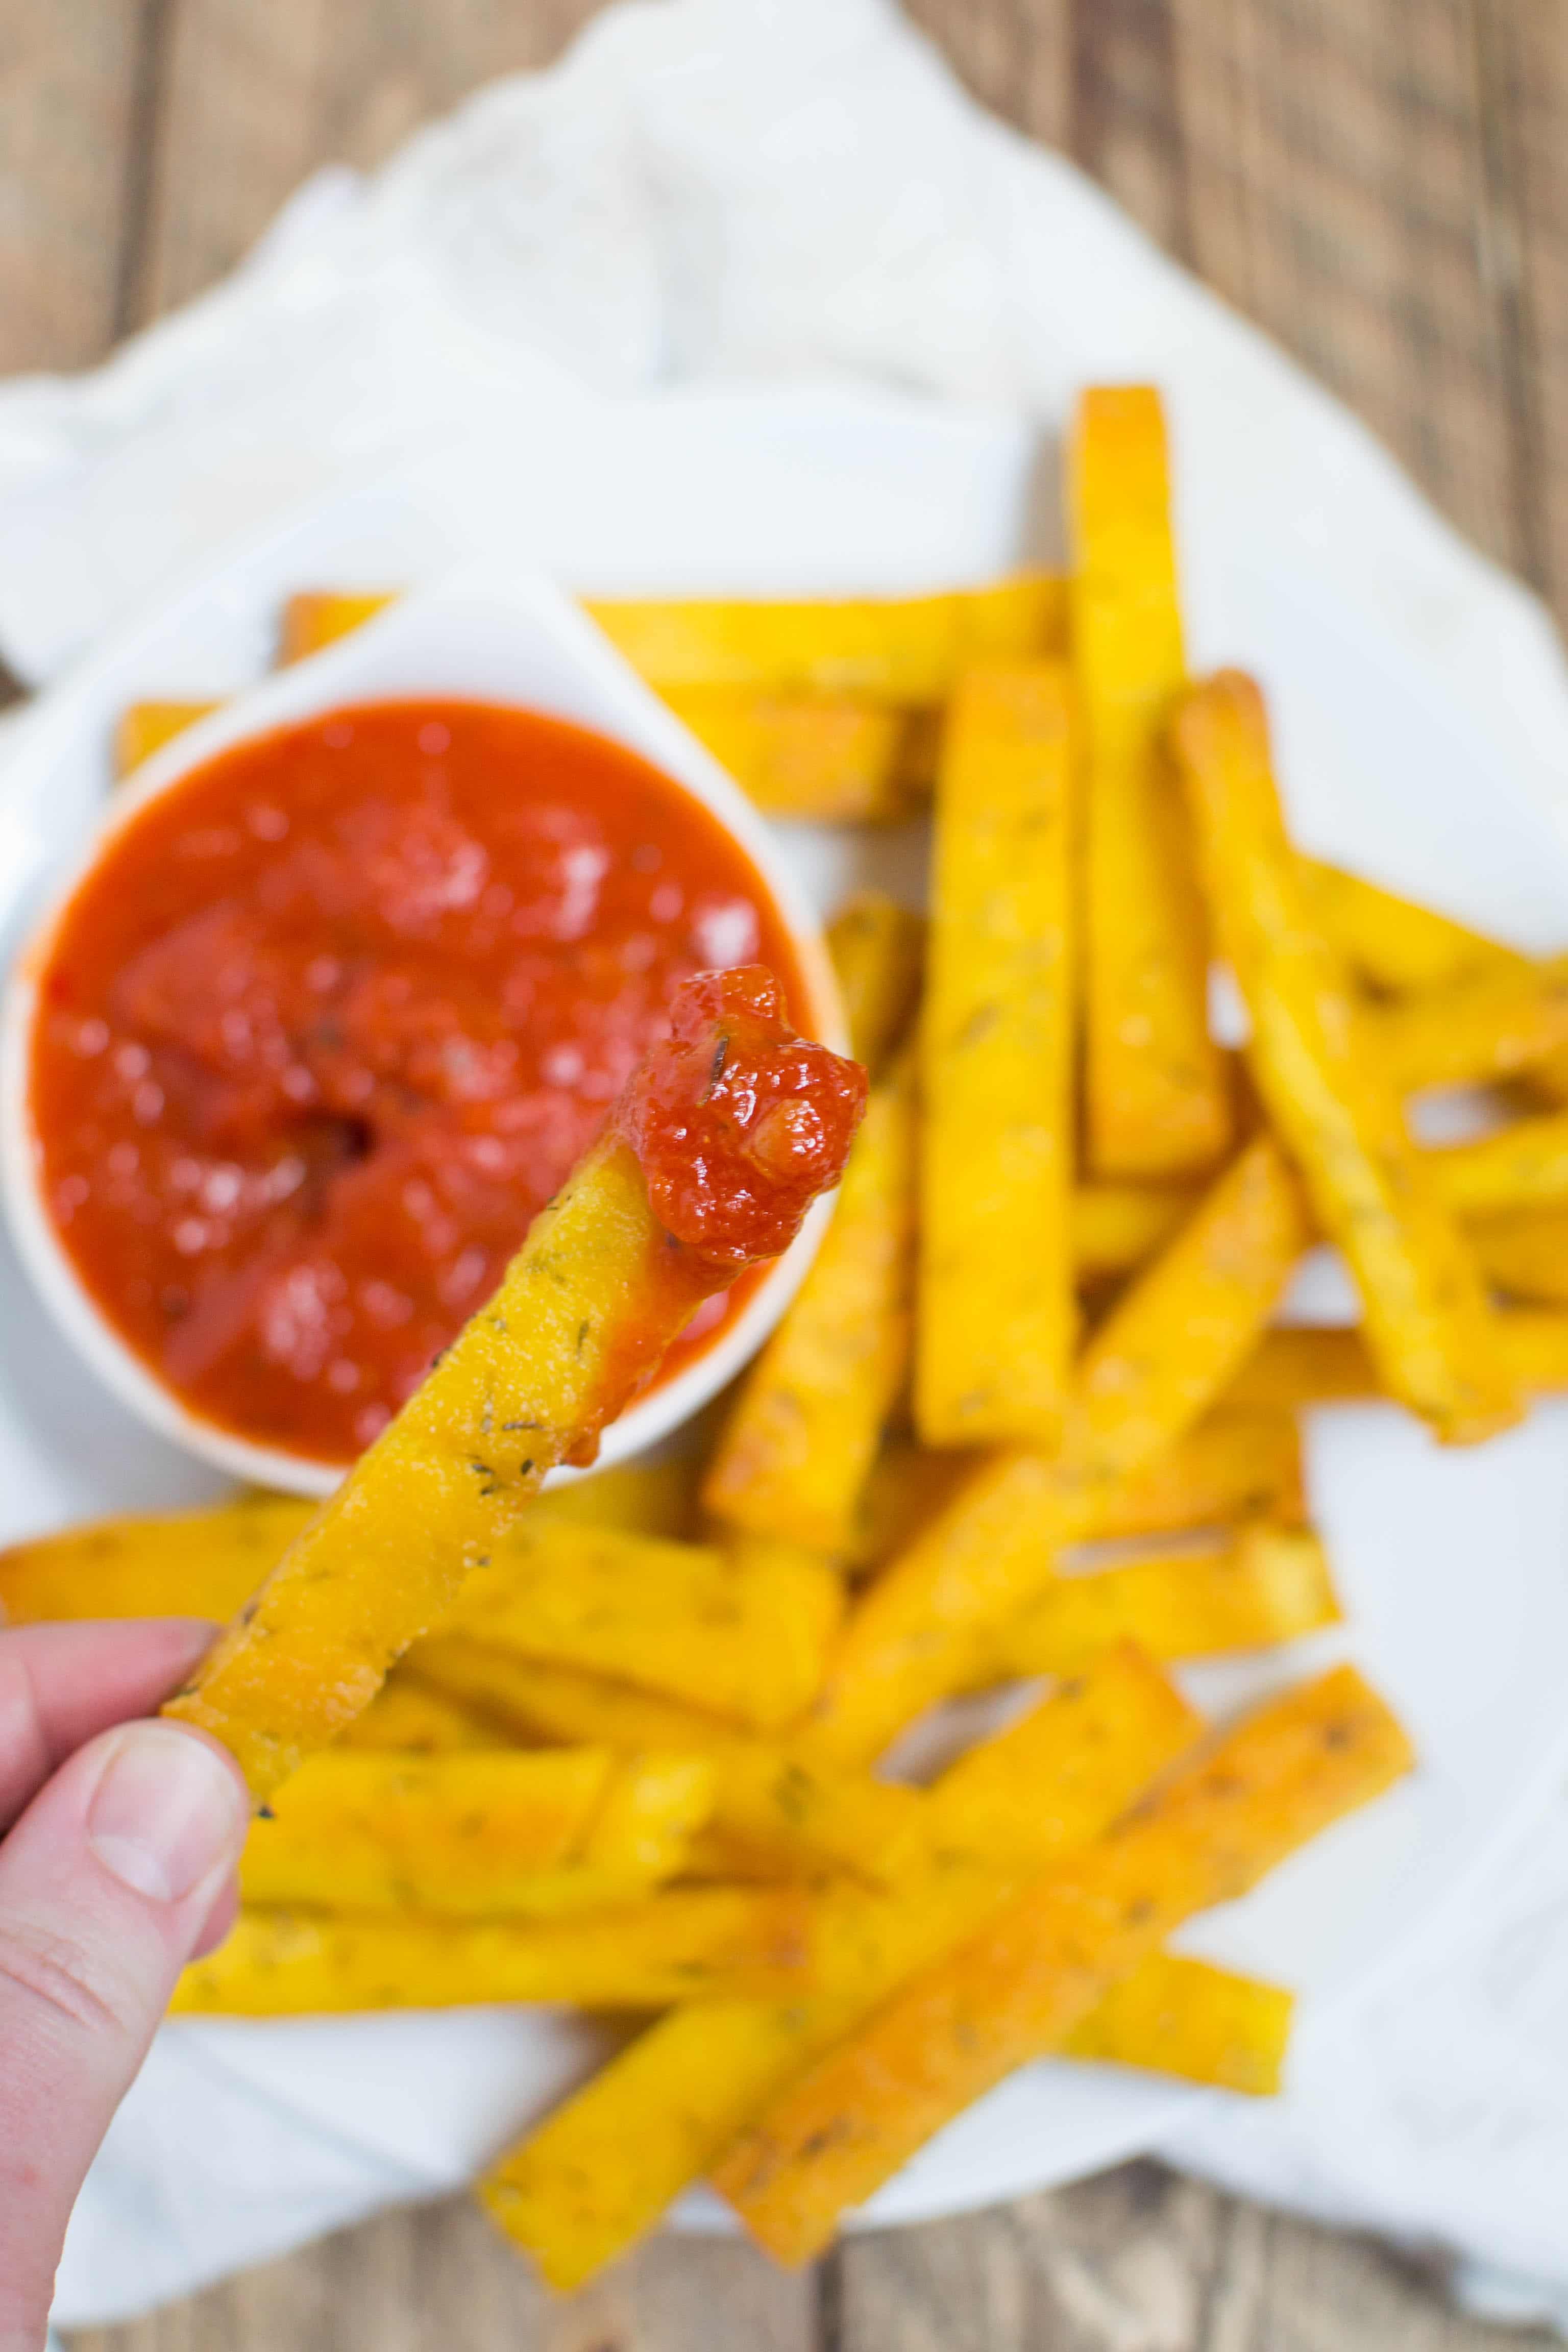 A hand holding a polenta fry that is dipped into marinara sauce.